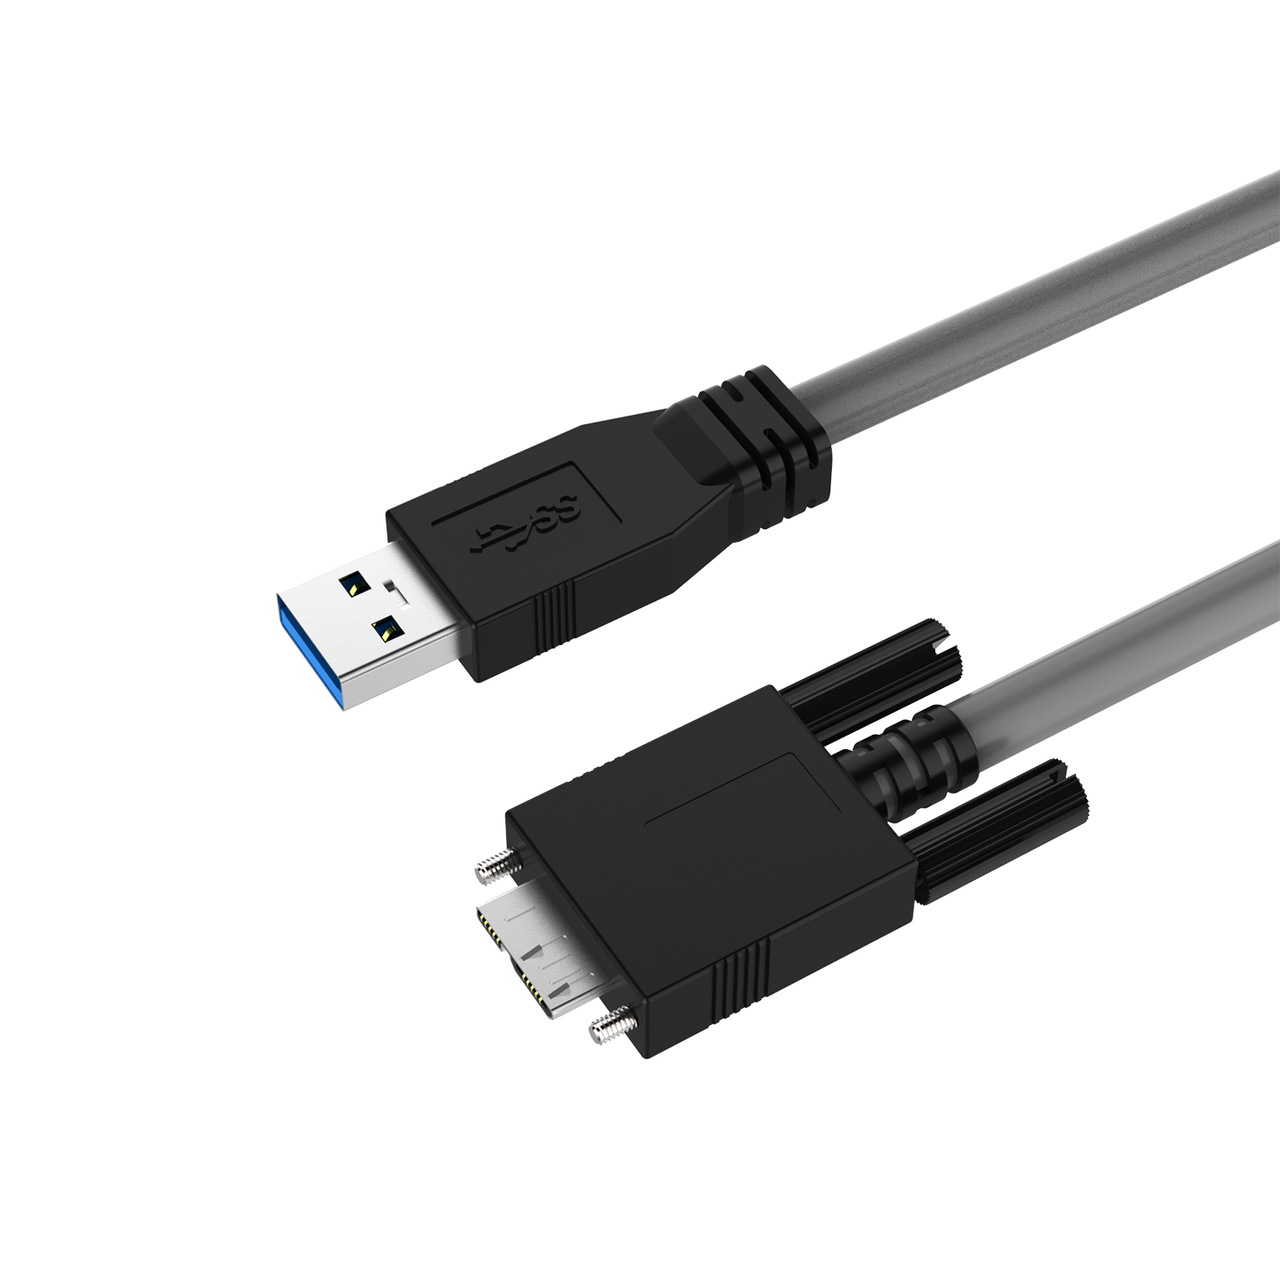 Instrument vlam Mus NTC | High Flex USB 3.0 A Male to Micro B Male with M2 Screw Locking Cable